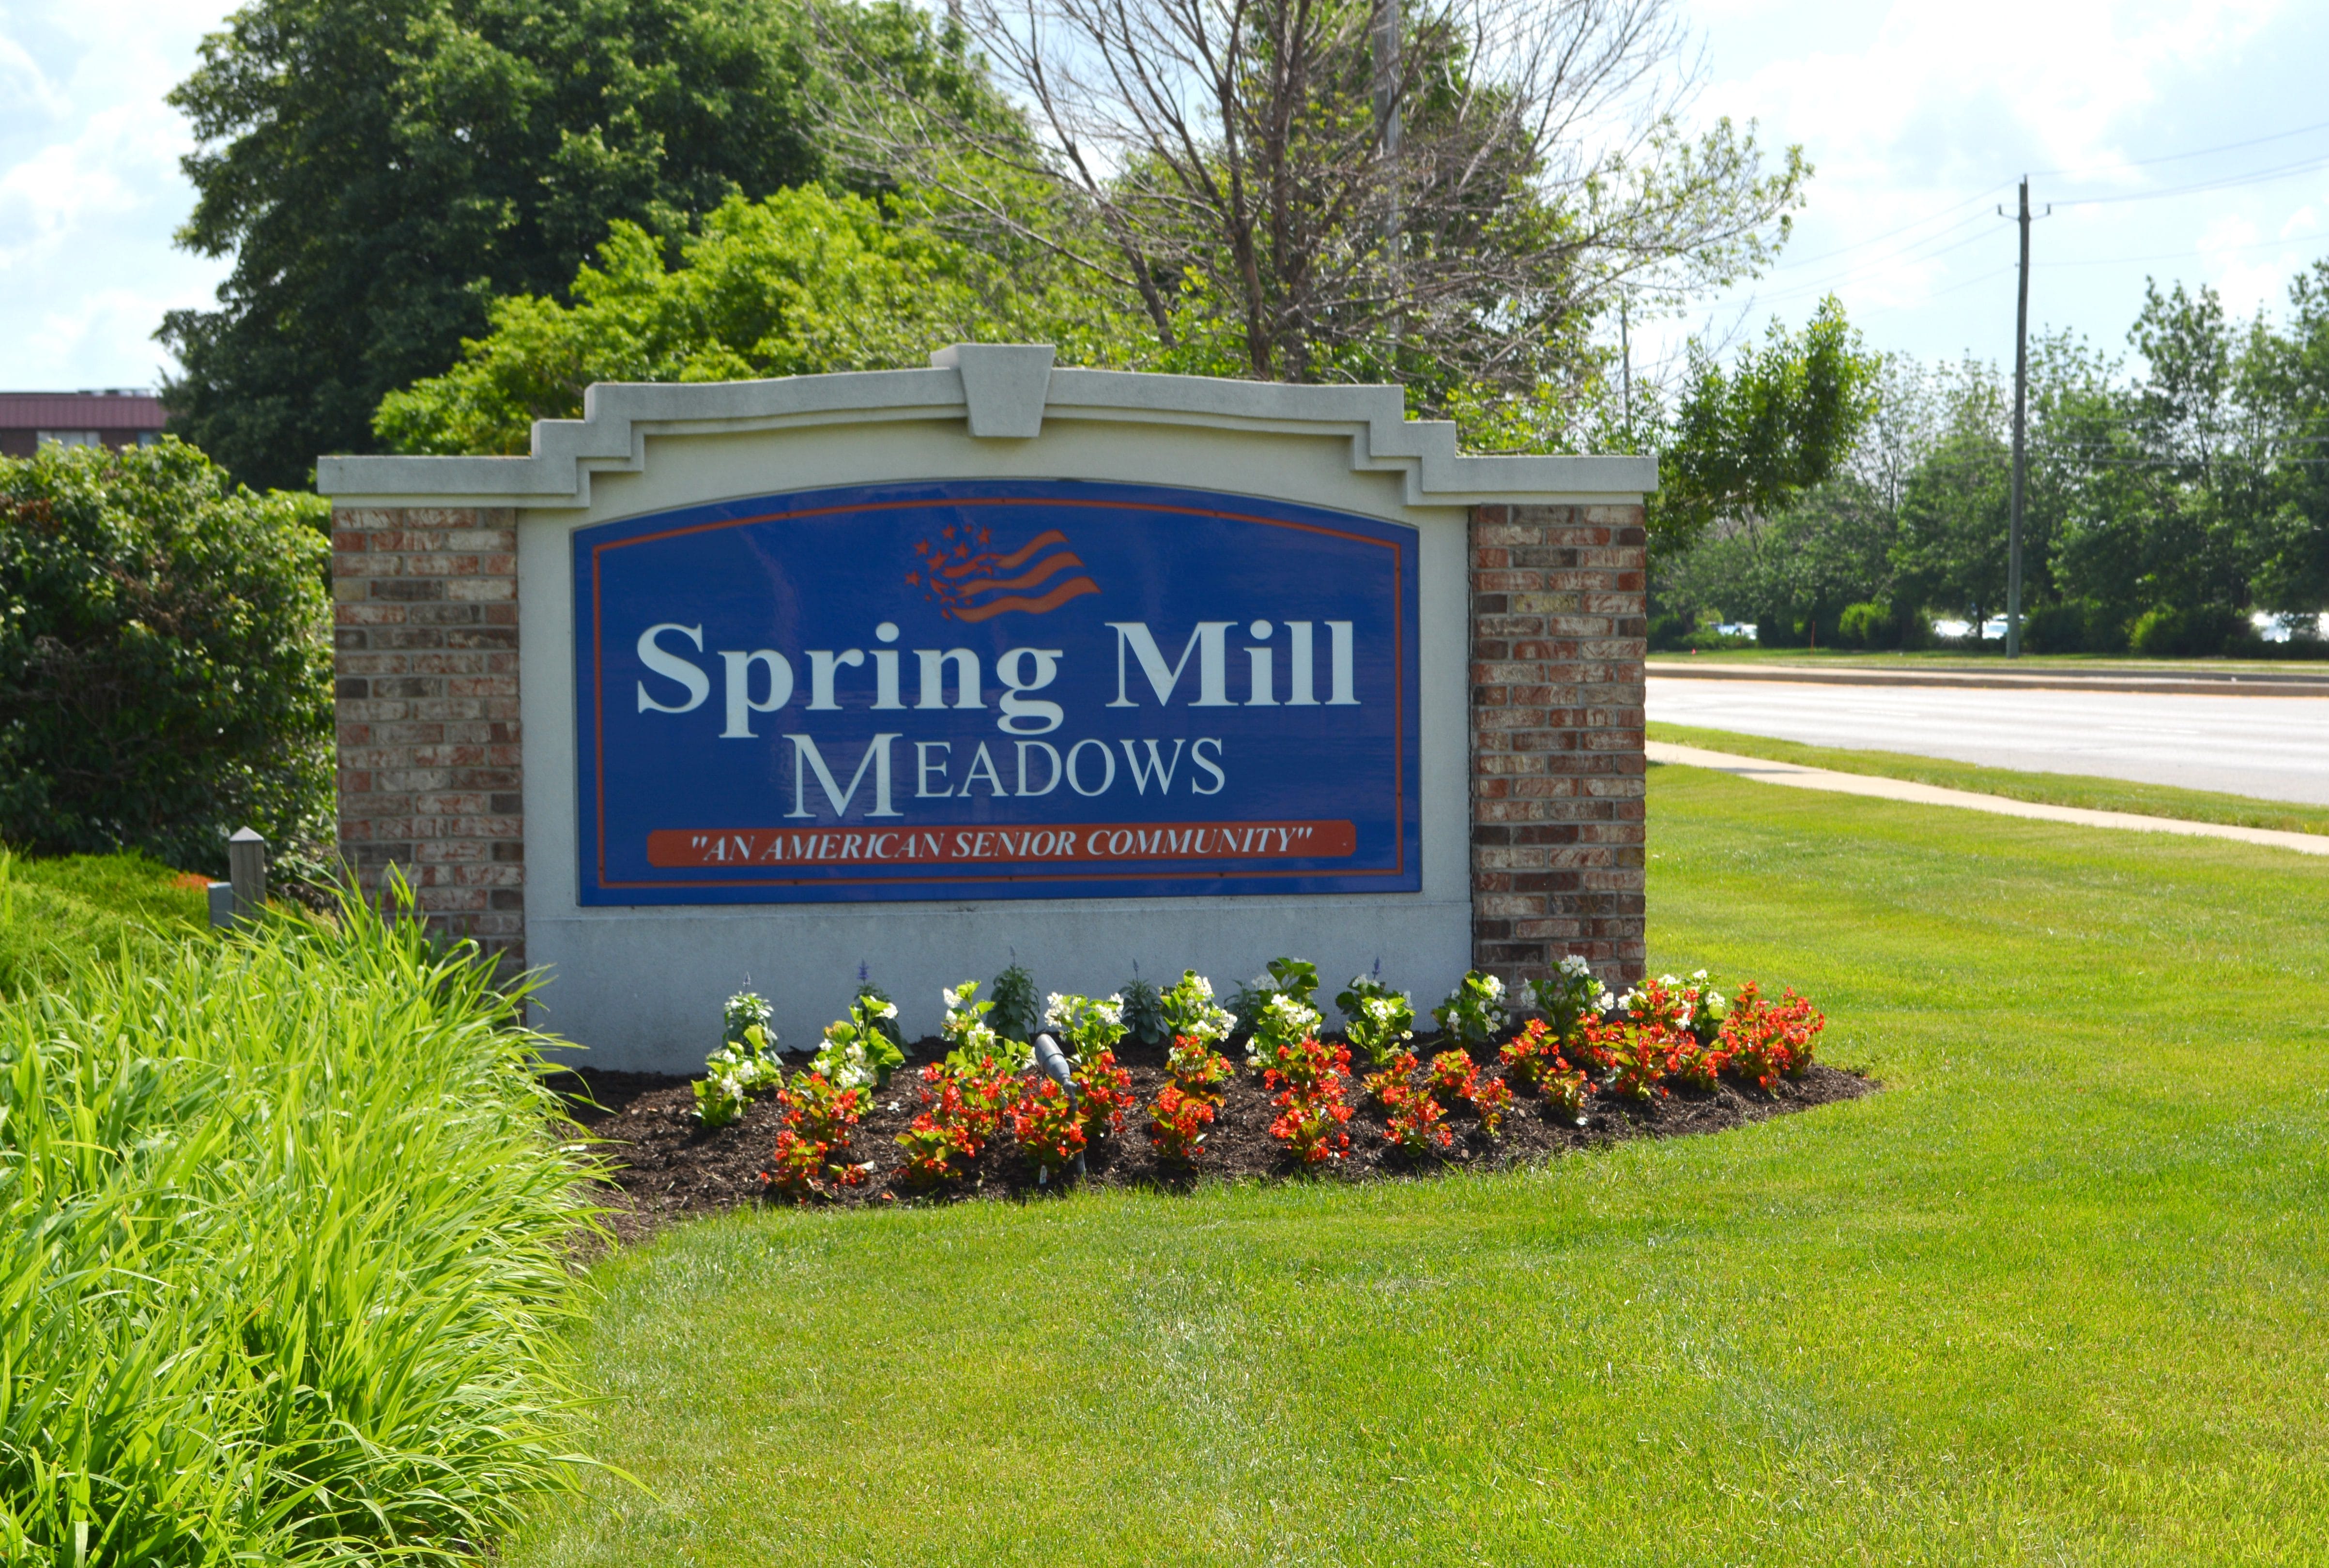 <span  class="uc_style_uc_tiles_grid_image_elementor_uc_items_attribute_title" style="color:#000000;">The Spring Mill Meadows entry sign</span>